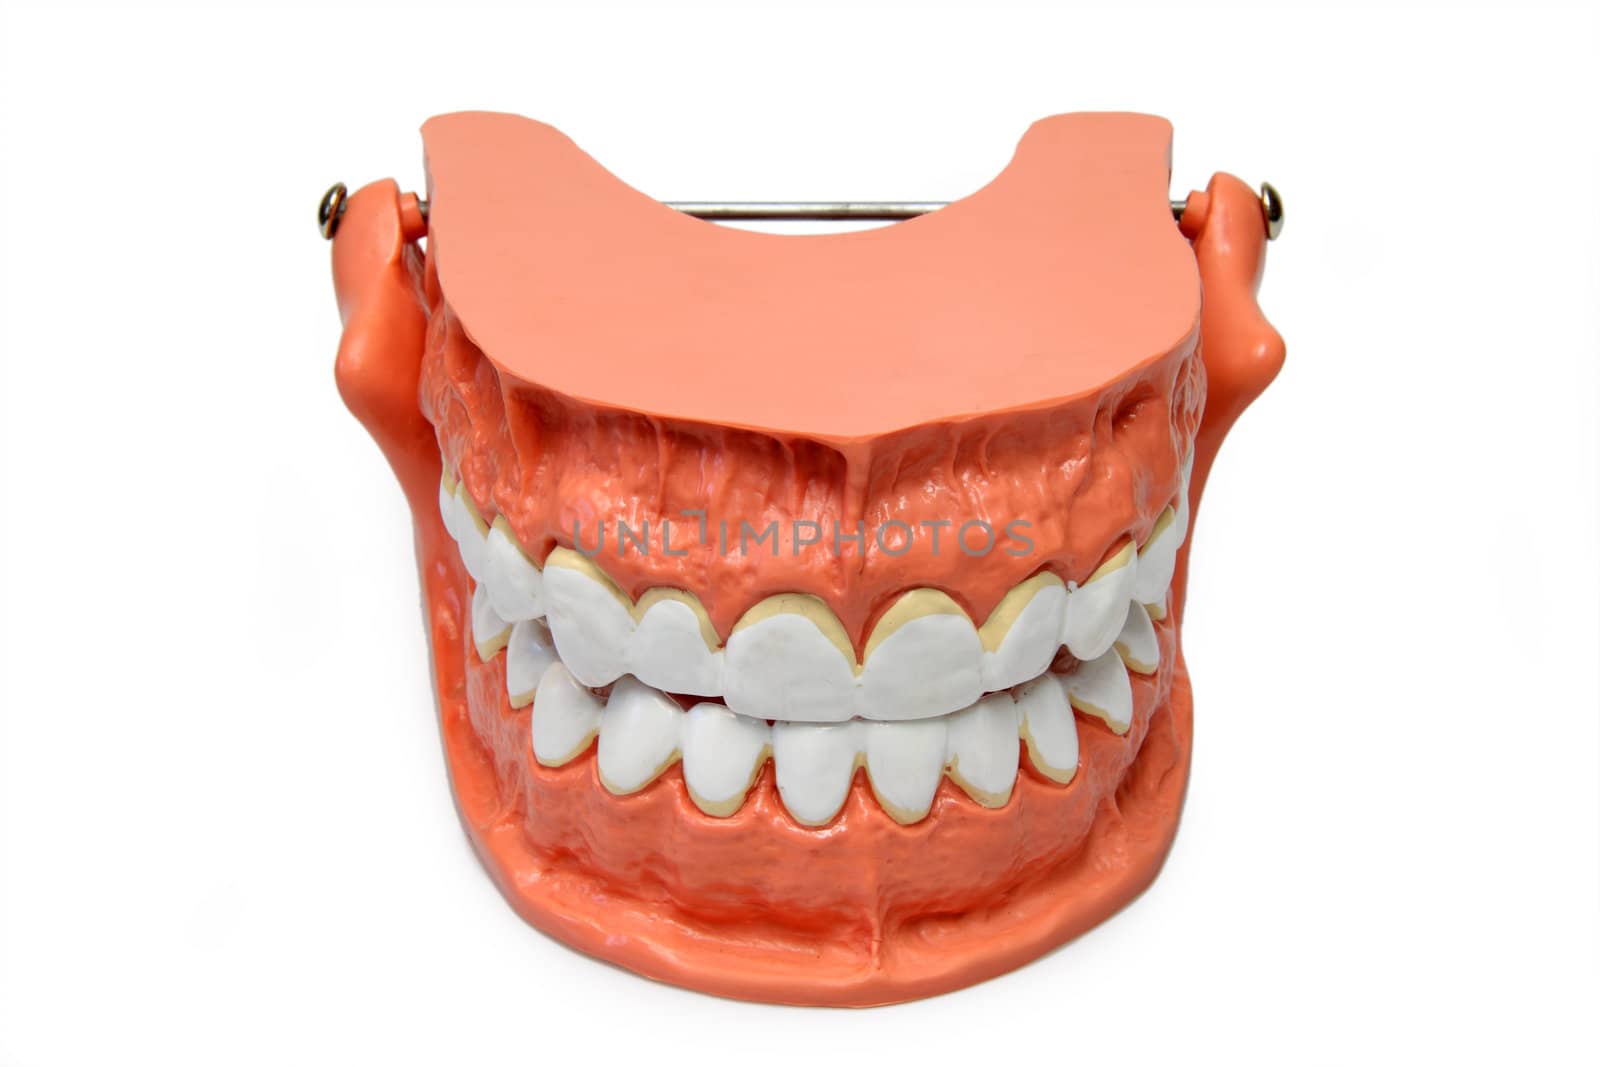 Plastic model of teeth isolated on white background